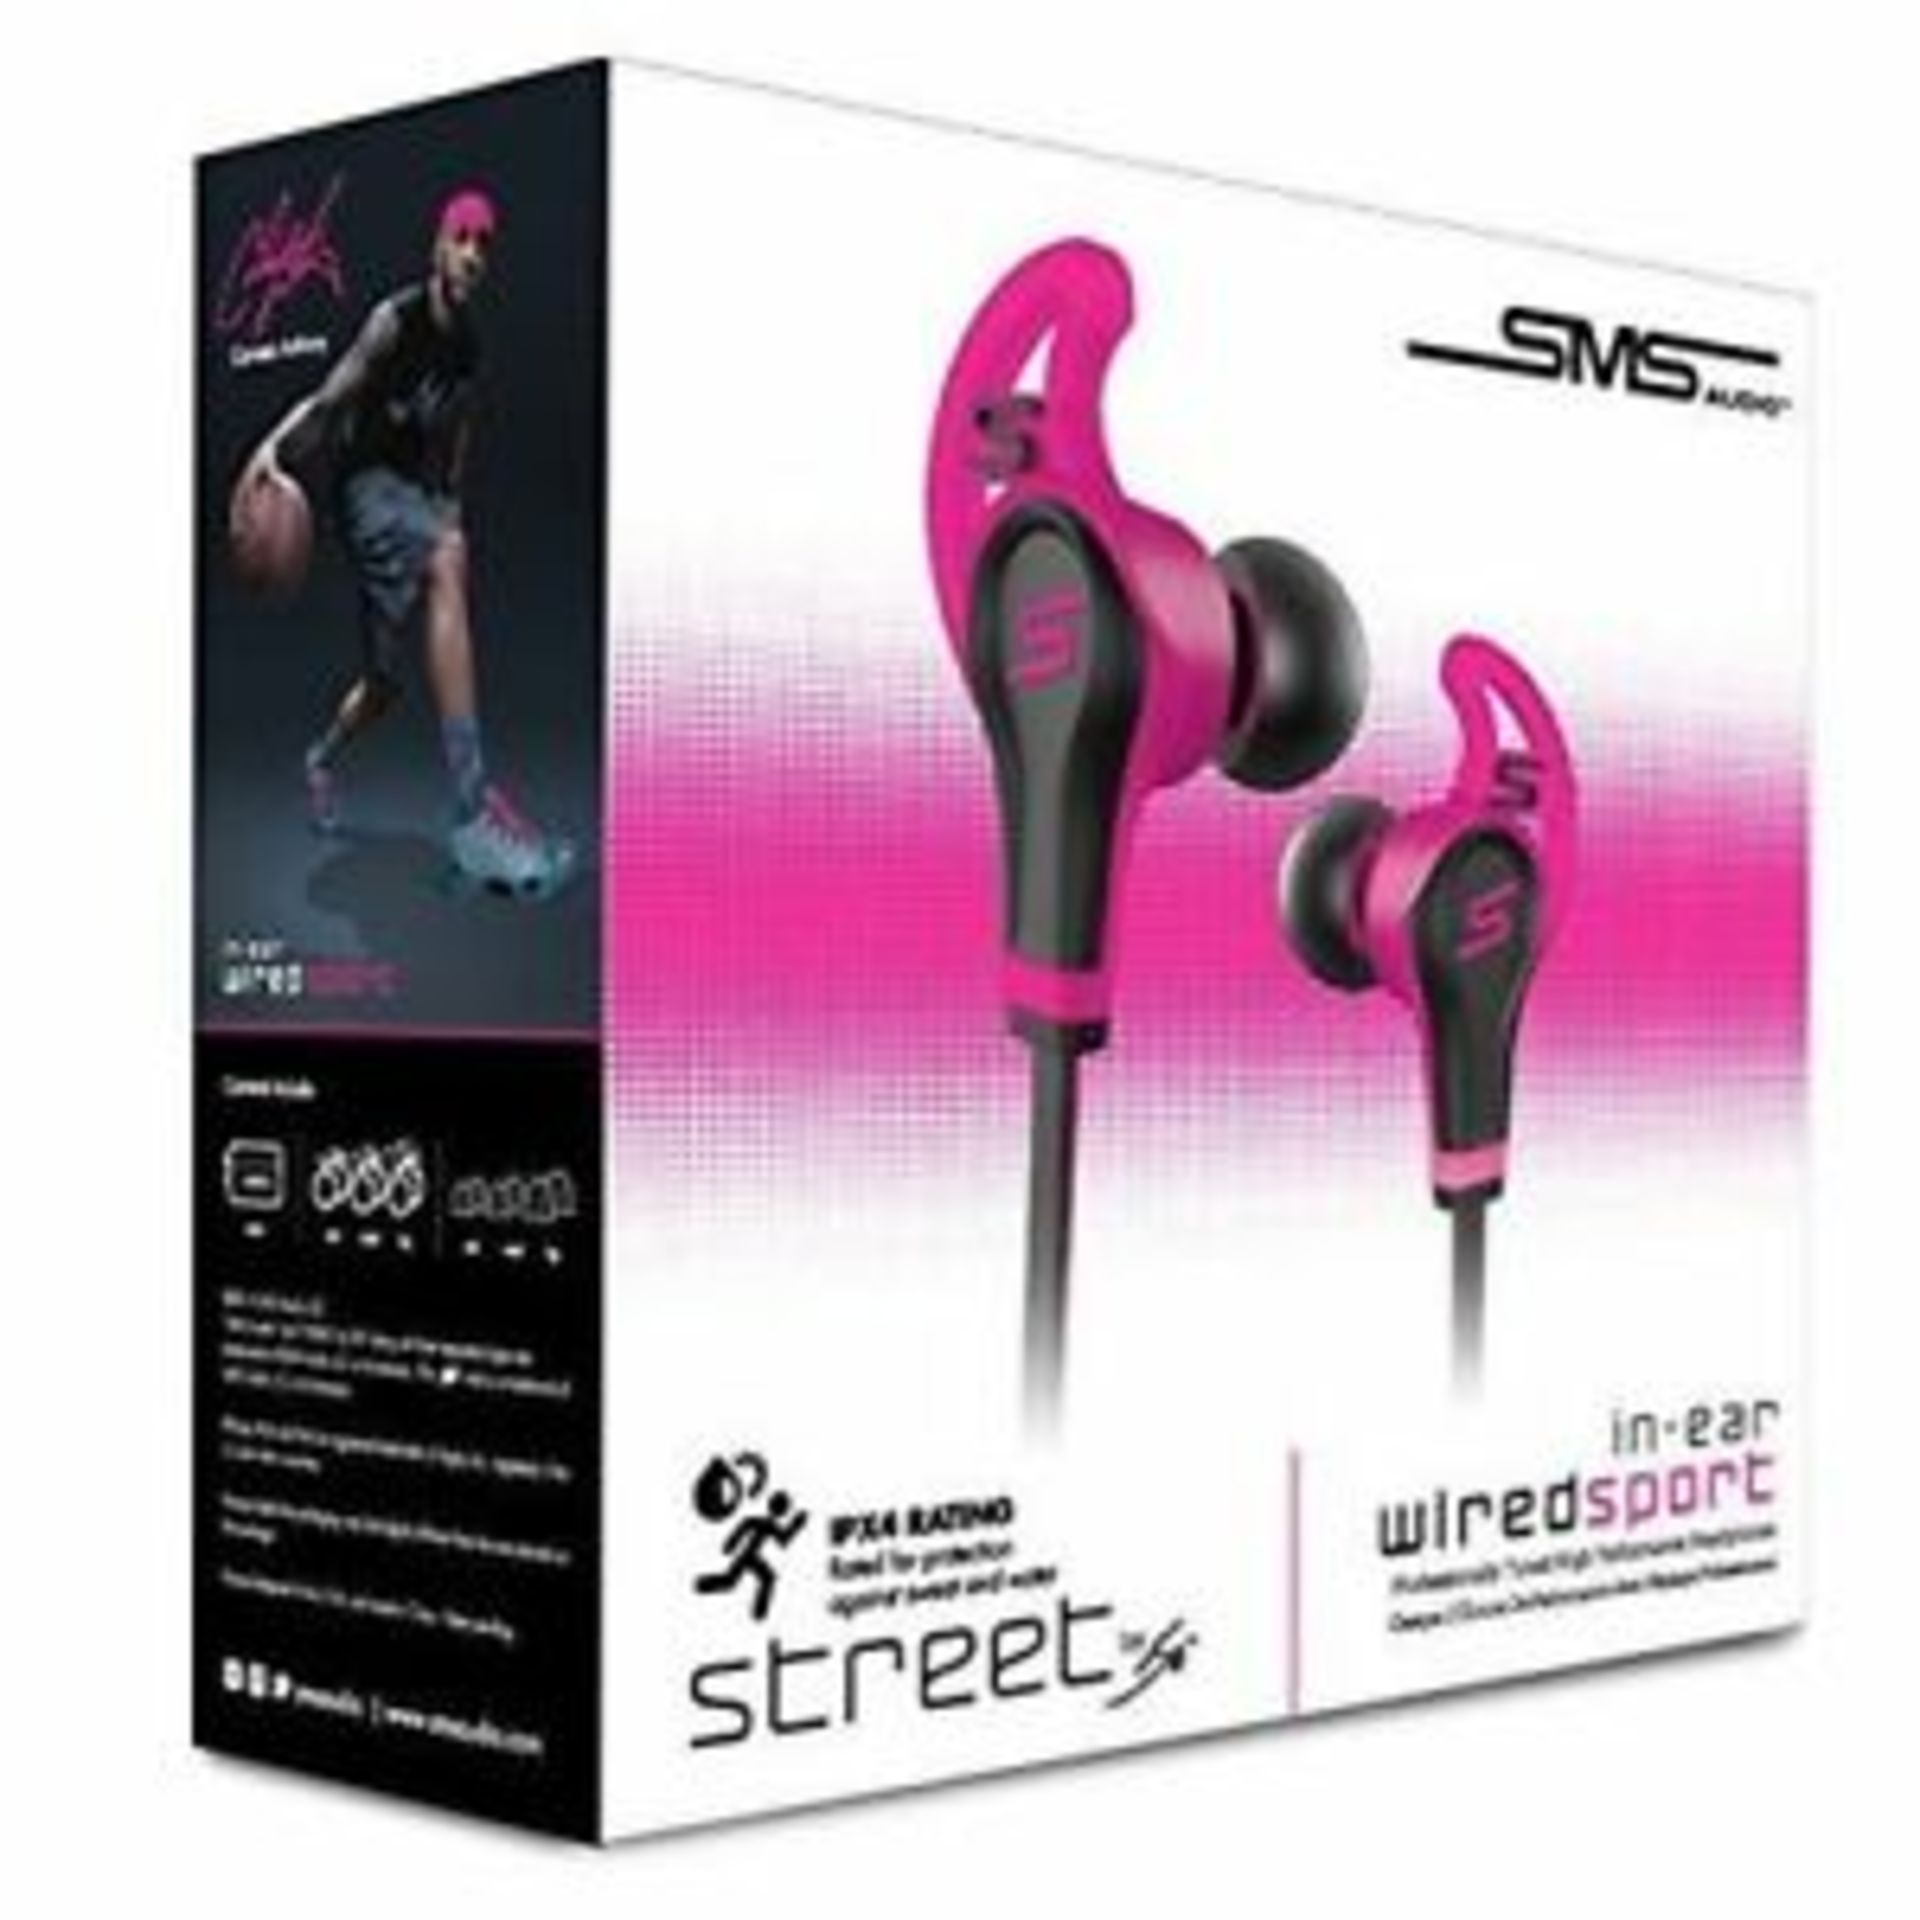 Brand New SMS Audio Street By 50 Cent Sport Earphones - RRP 59.